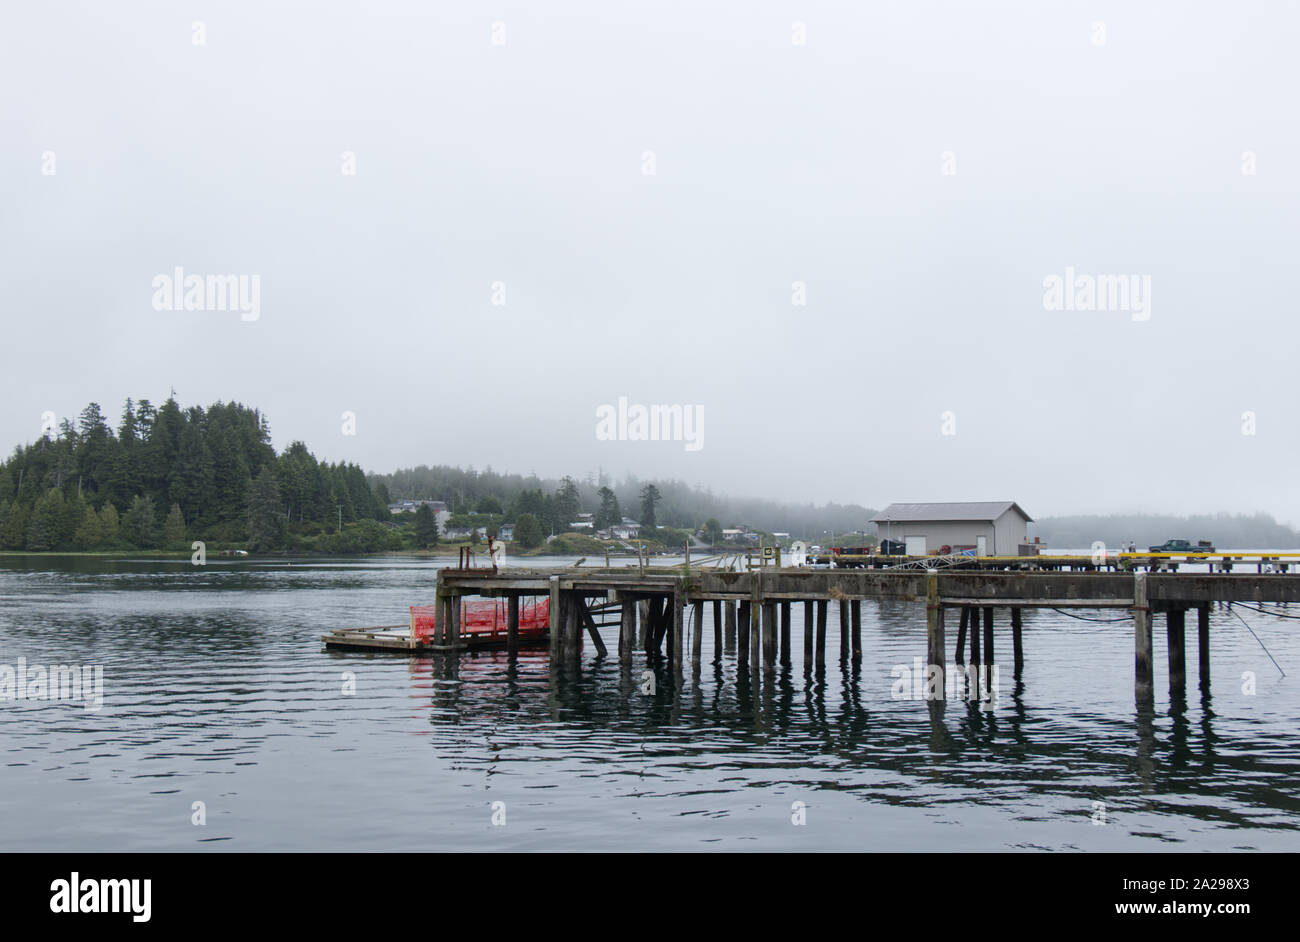 Small Dock for fishing boats in the middle of the Village at early morning Stock Photo